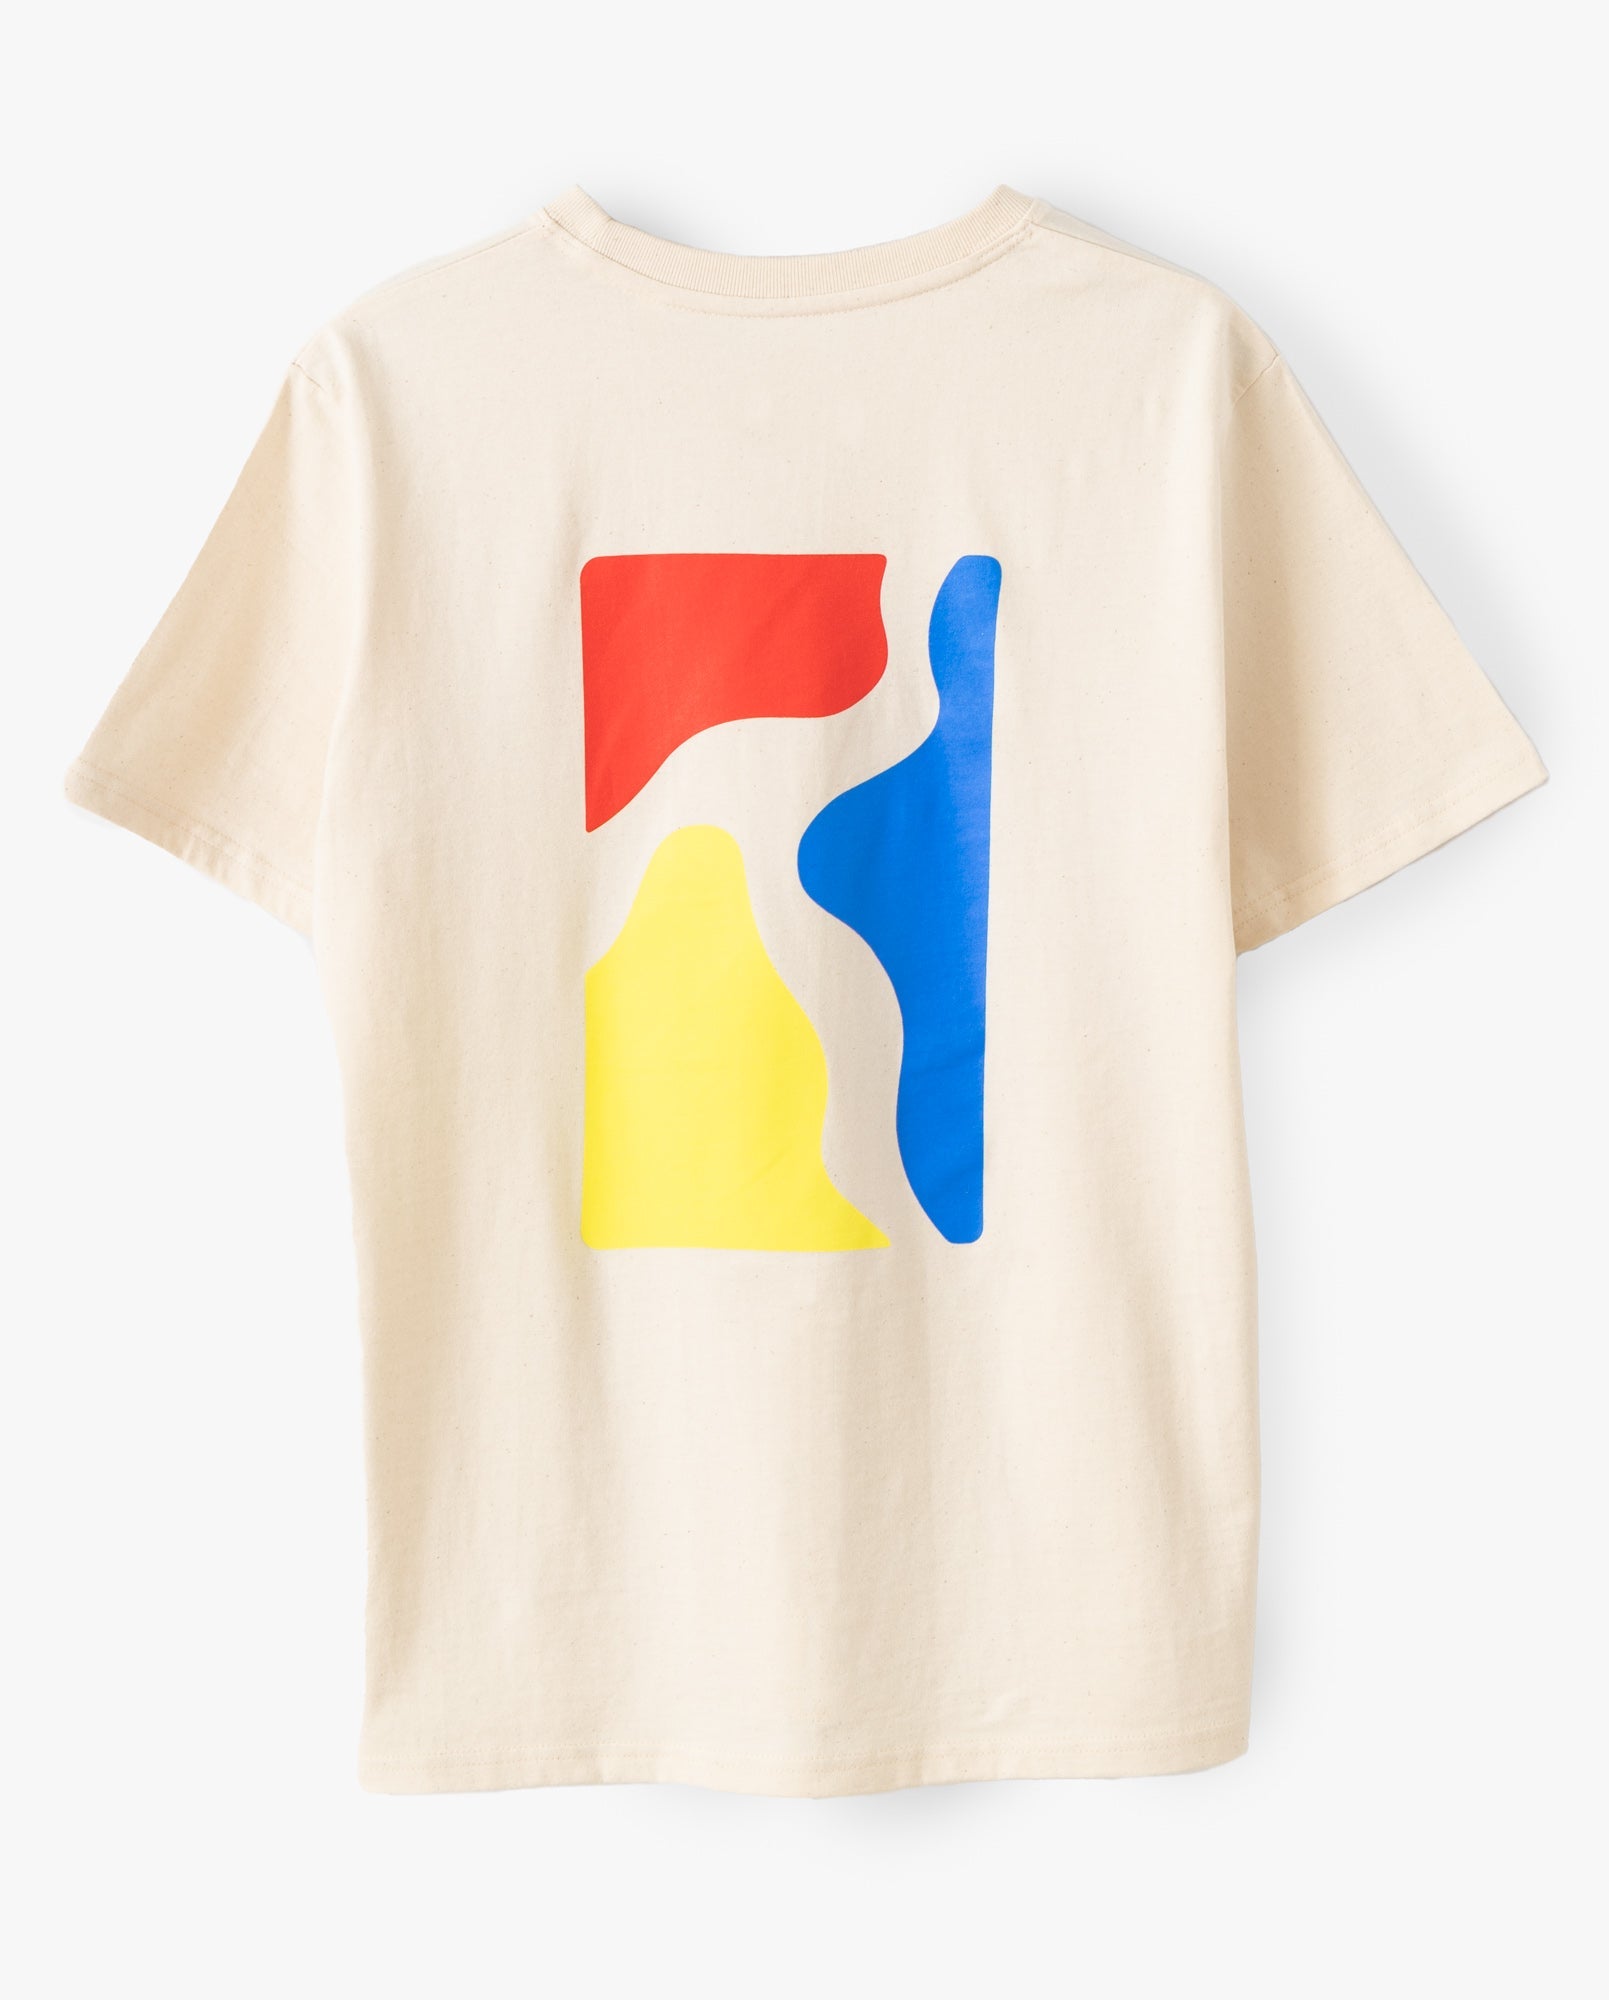 Poetic Collective Color Logo Tee - Natural White - SkatebruhSG